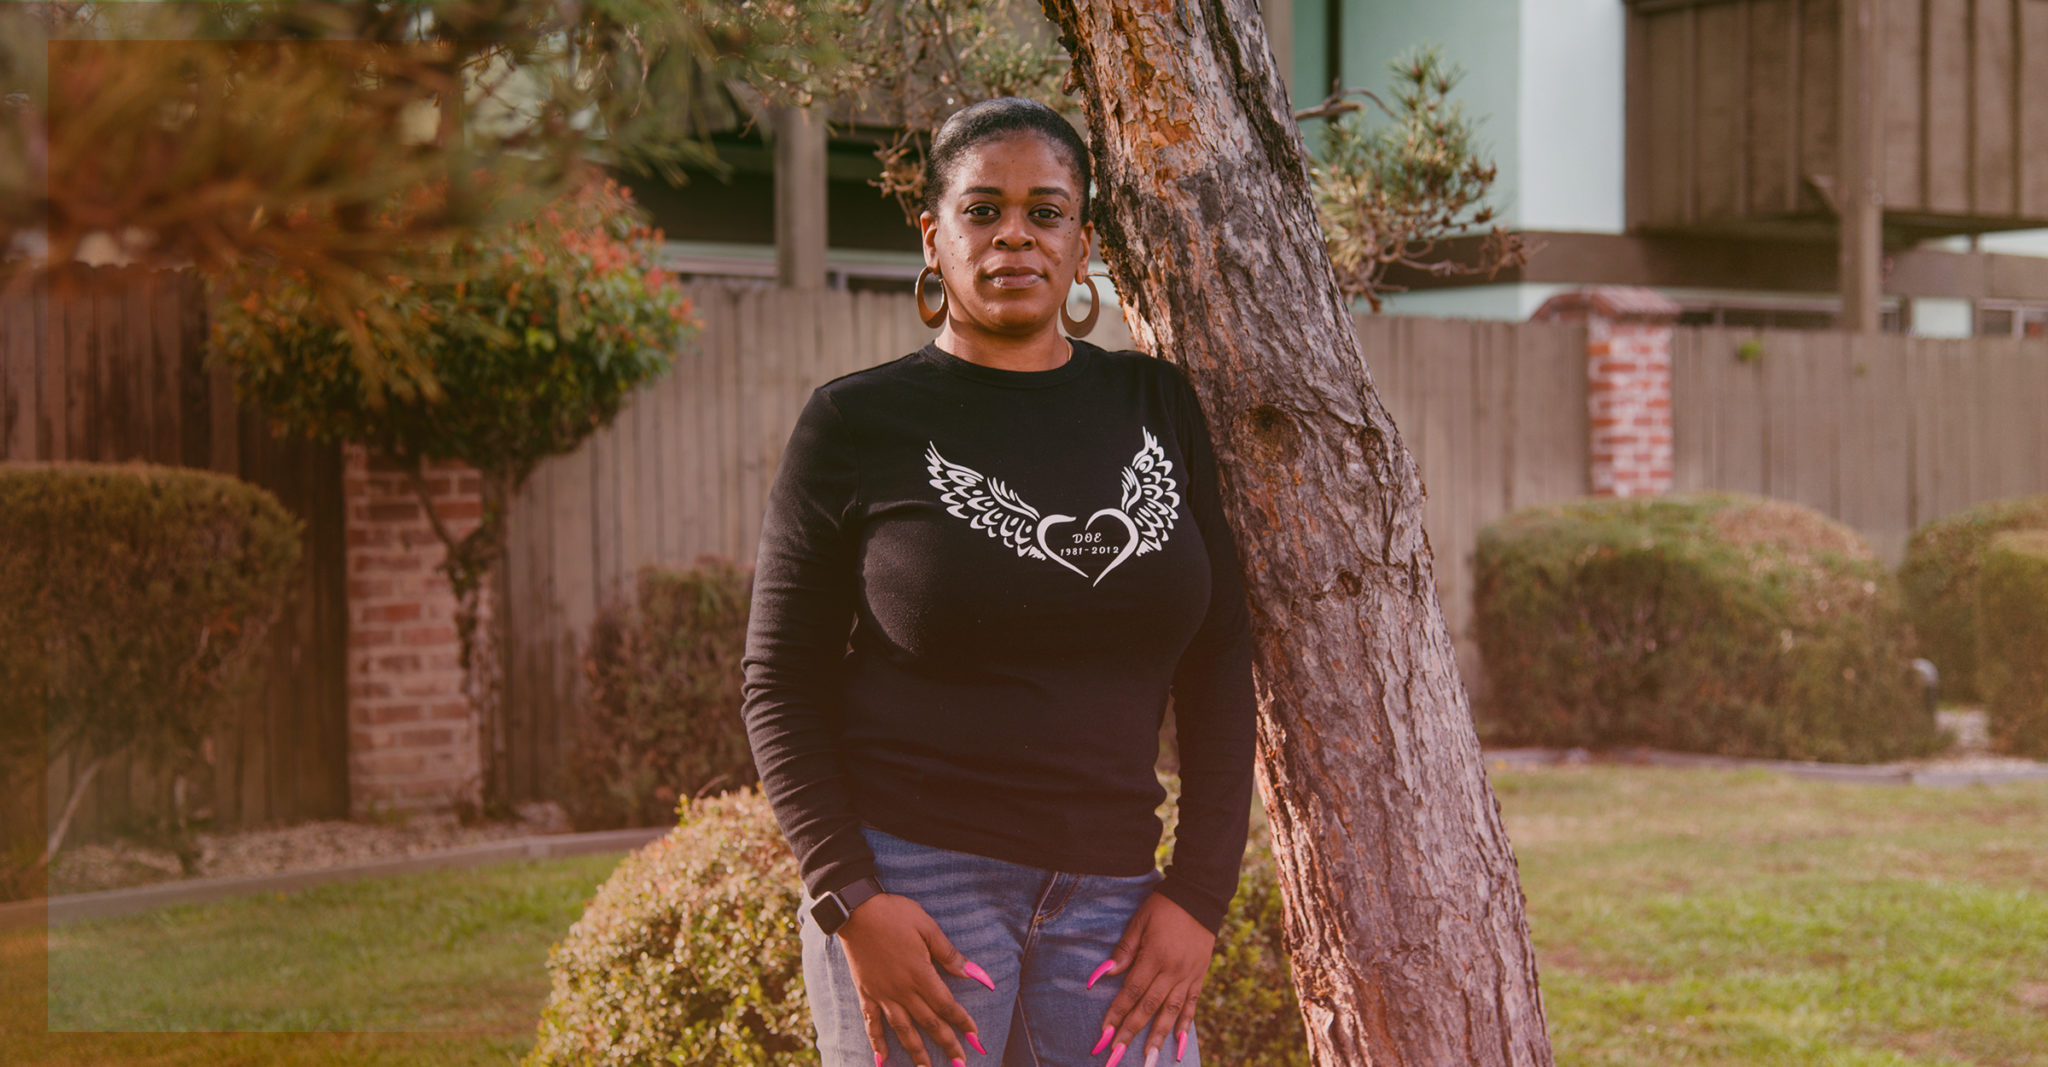 Her Brothers Shooting Pushed Tashante Mccoy Ham To Activism